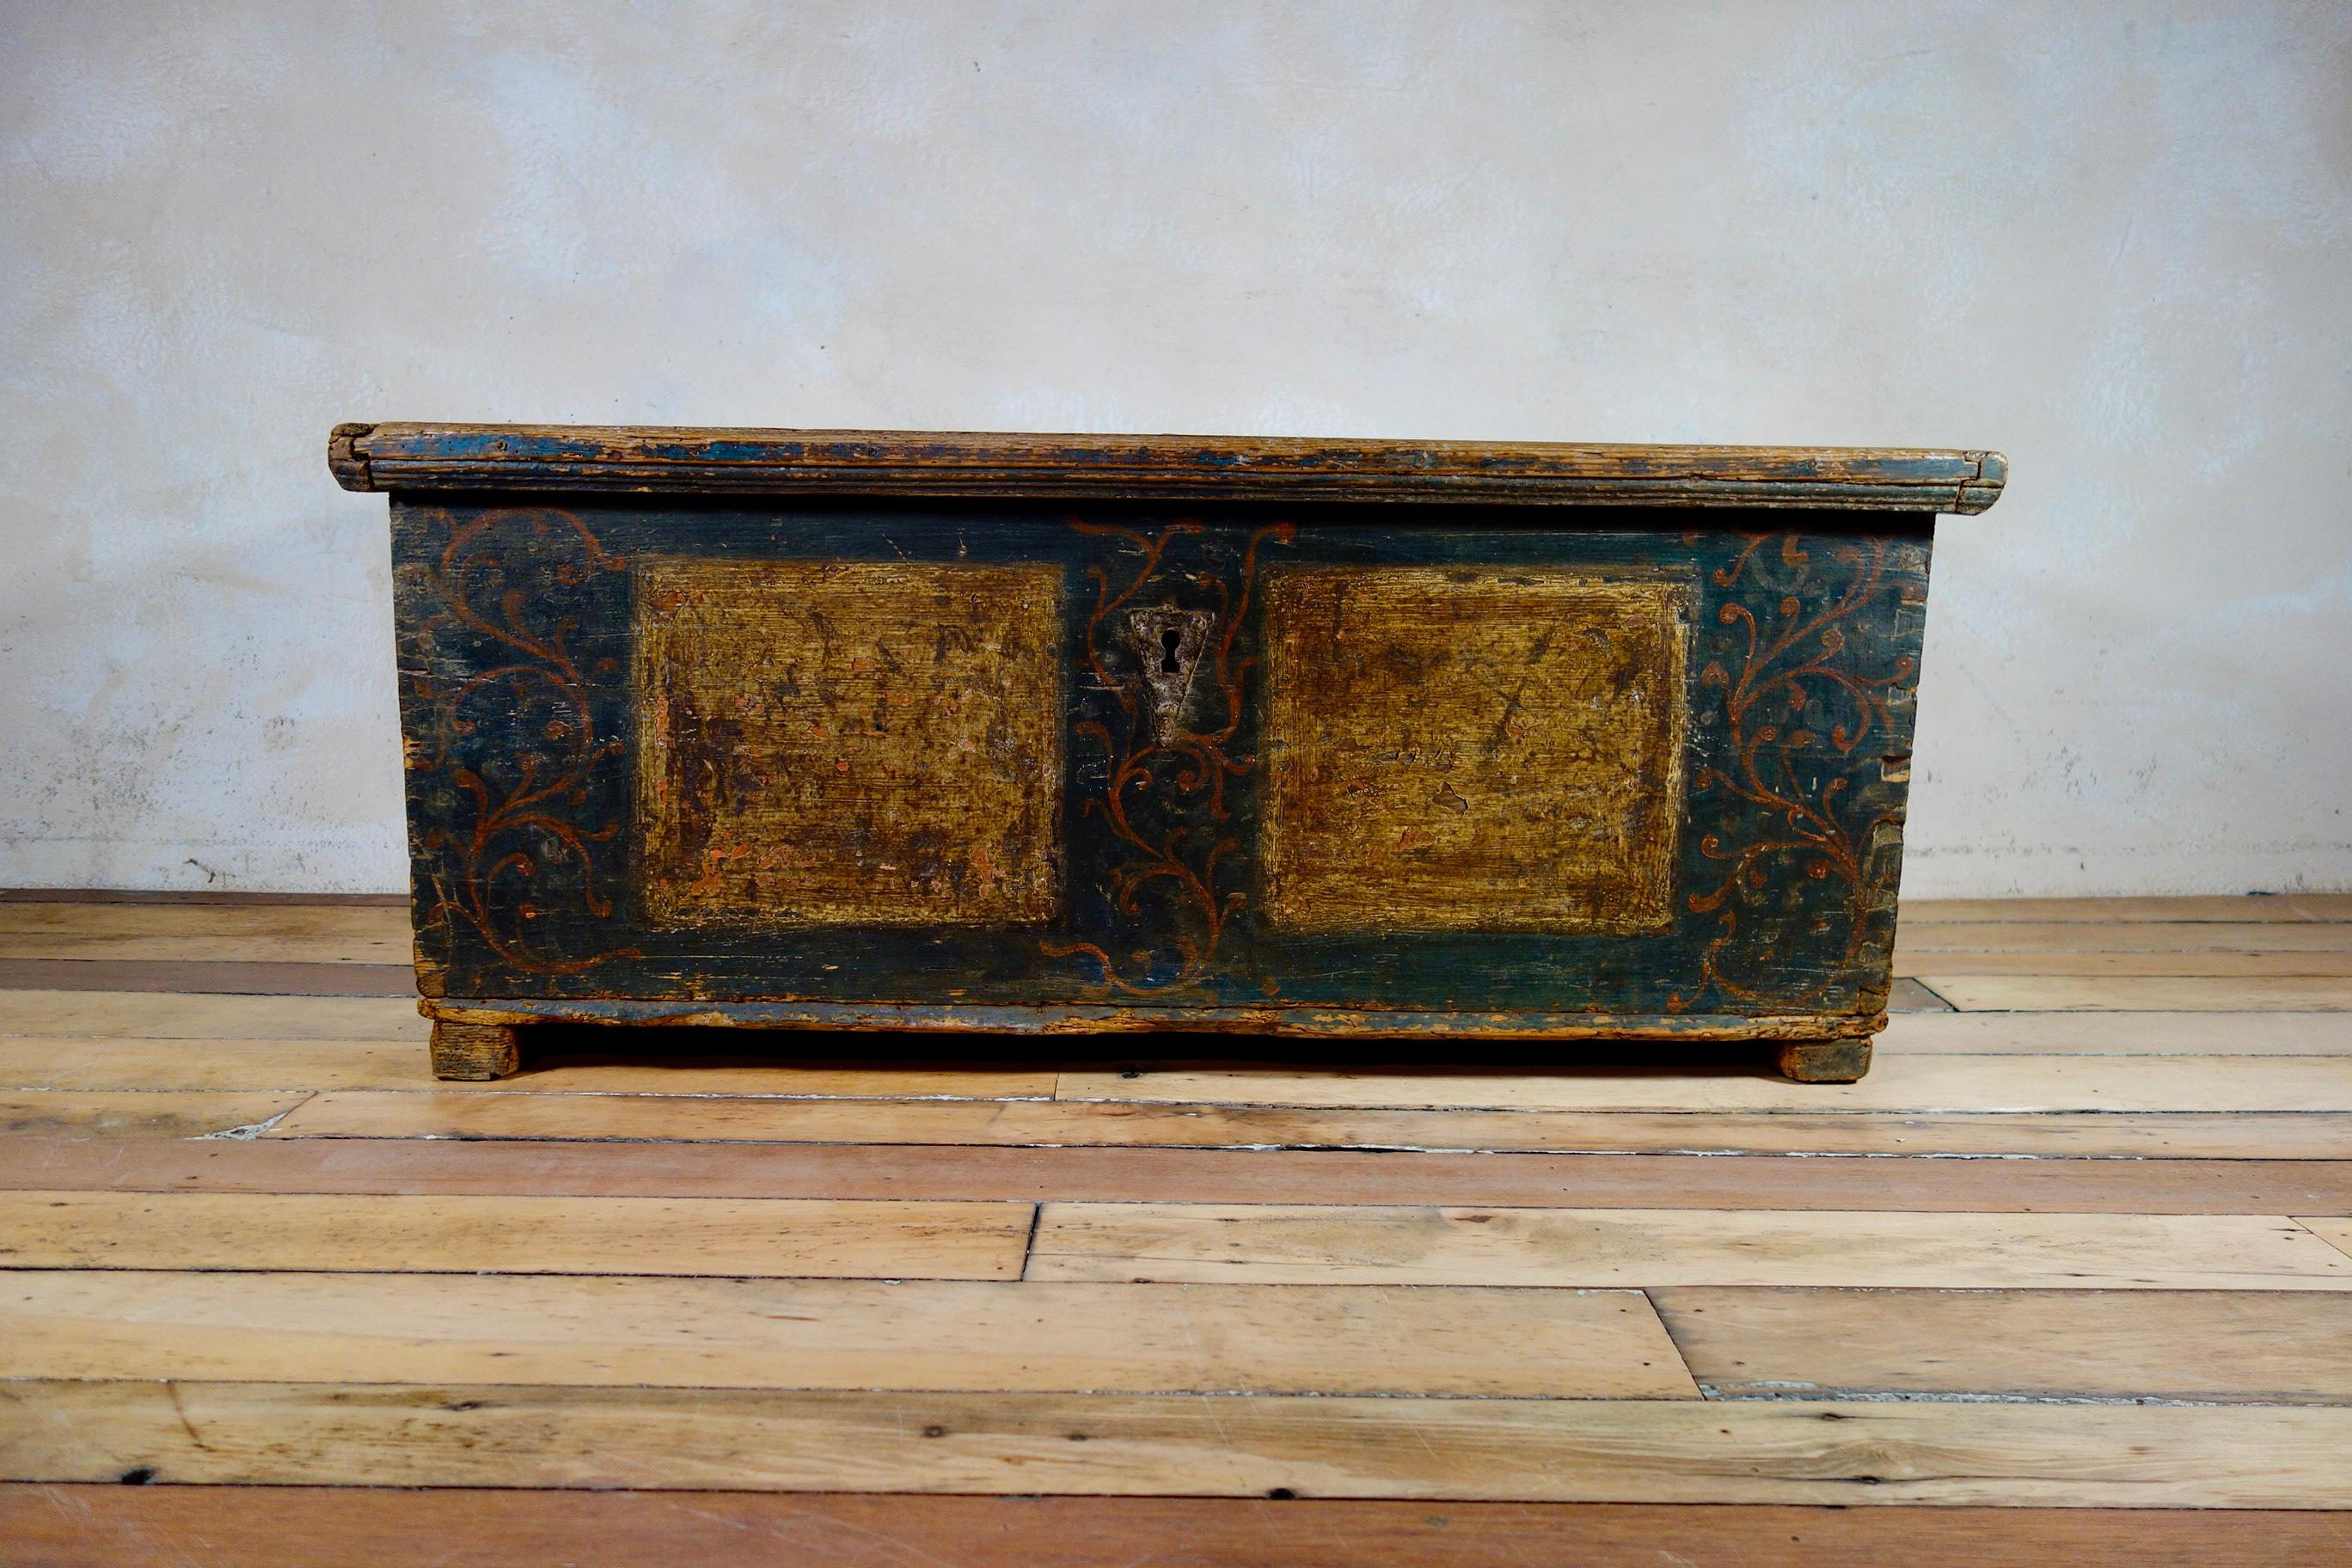 An antique hand painted marriage or dowry chest originating from Northern Europe and dating from the late 18th century. Featuring subtle original hand painted decorations to the front and sides of the chest with further faded decorations to the top